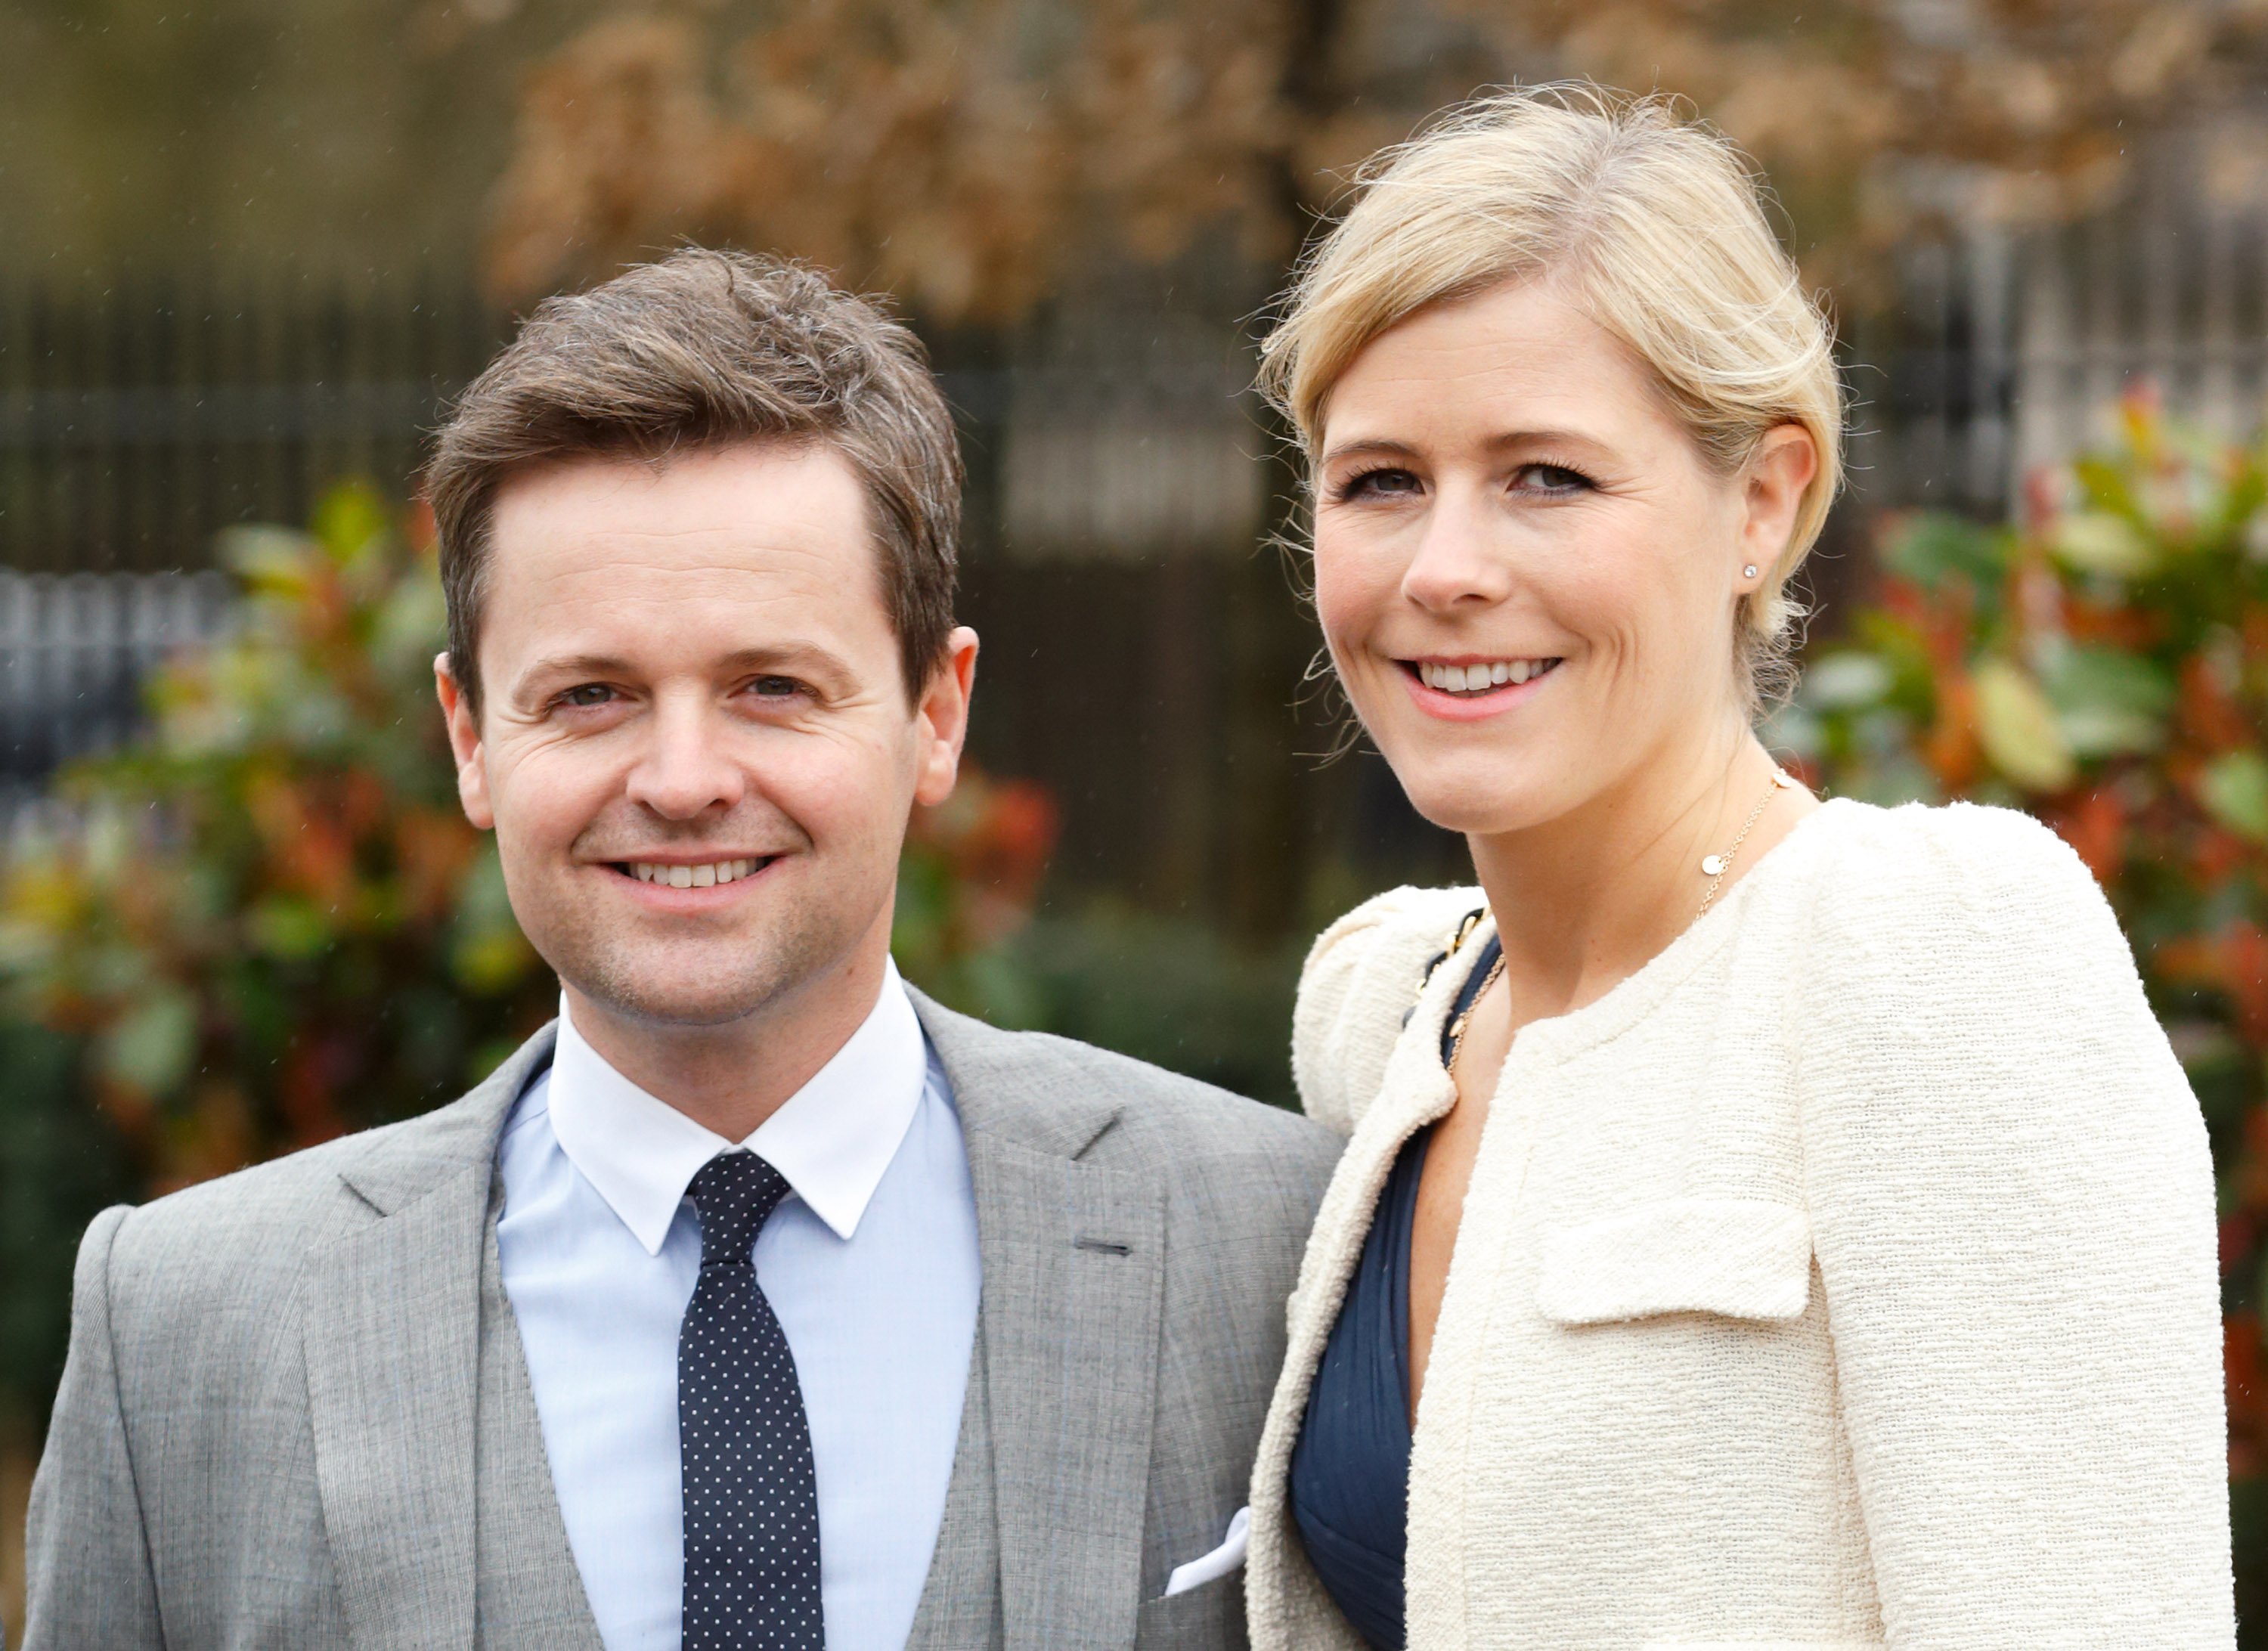 Declan Donnelly and Ali Astall at The Prince's Countryside Fund Raceday on March 29, 2015, in London | Source: Getty Images